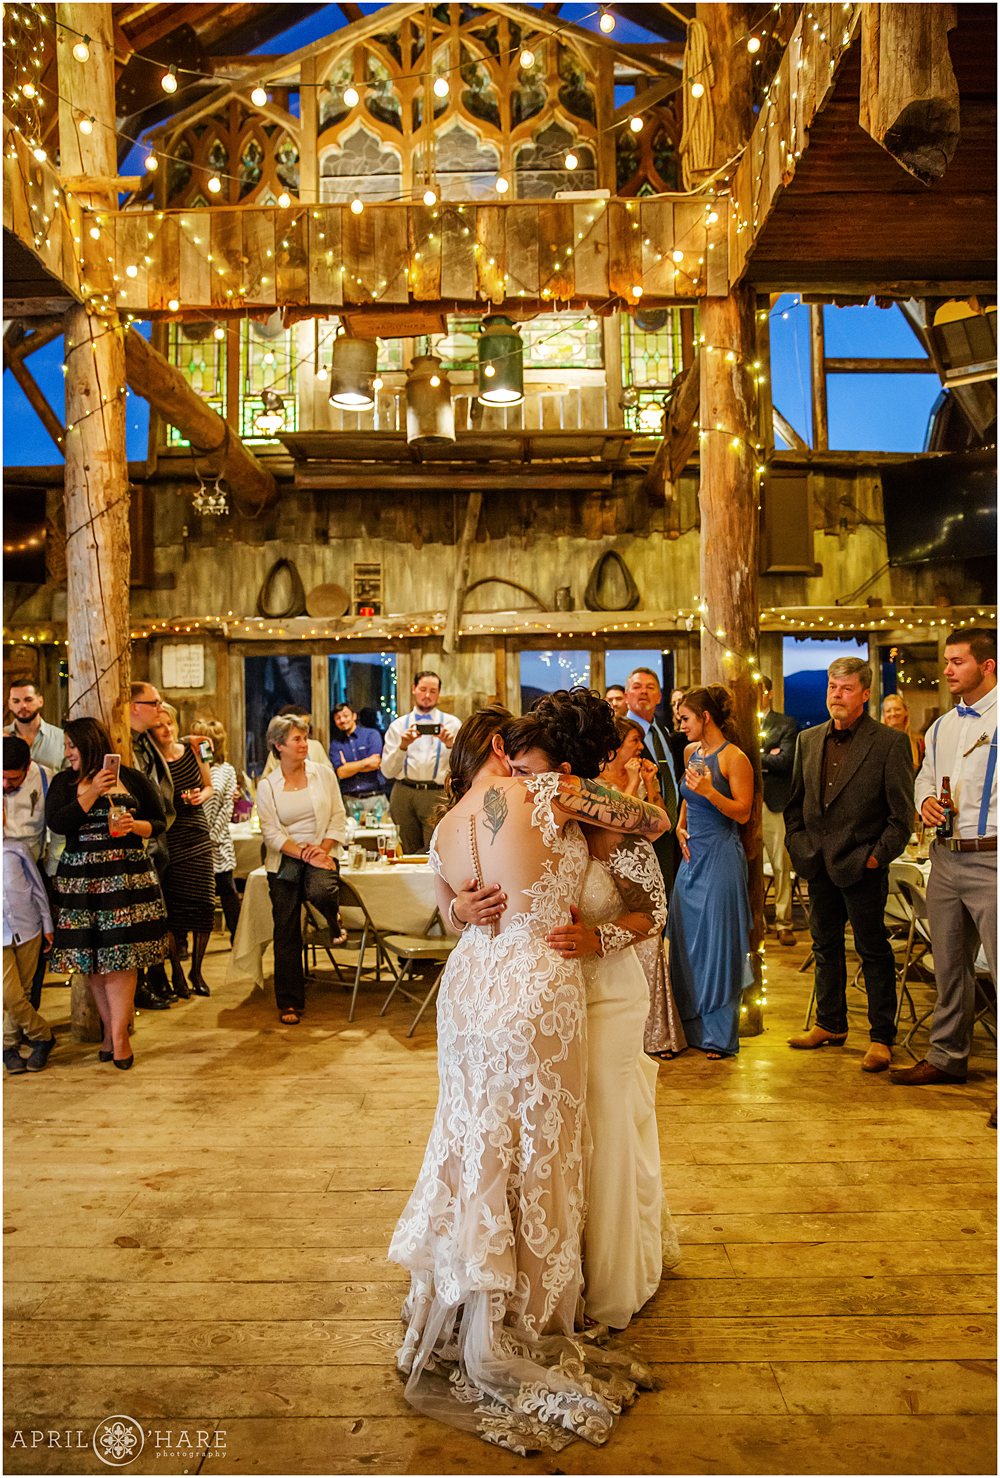 Beautiful romantic wedding photography inside the Barn at Evergreen Memorial Park in CO